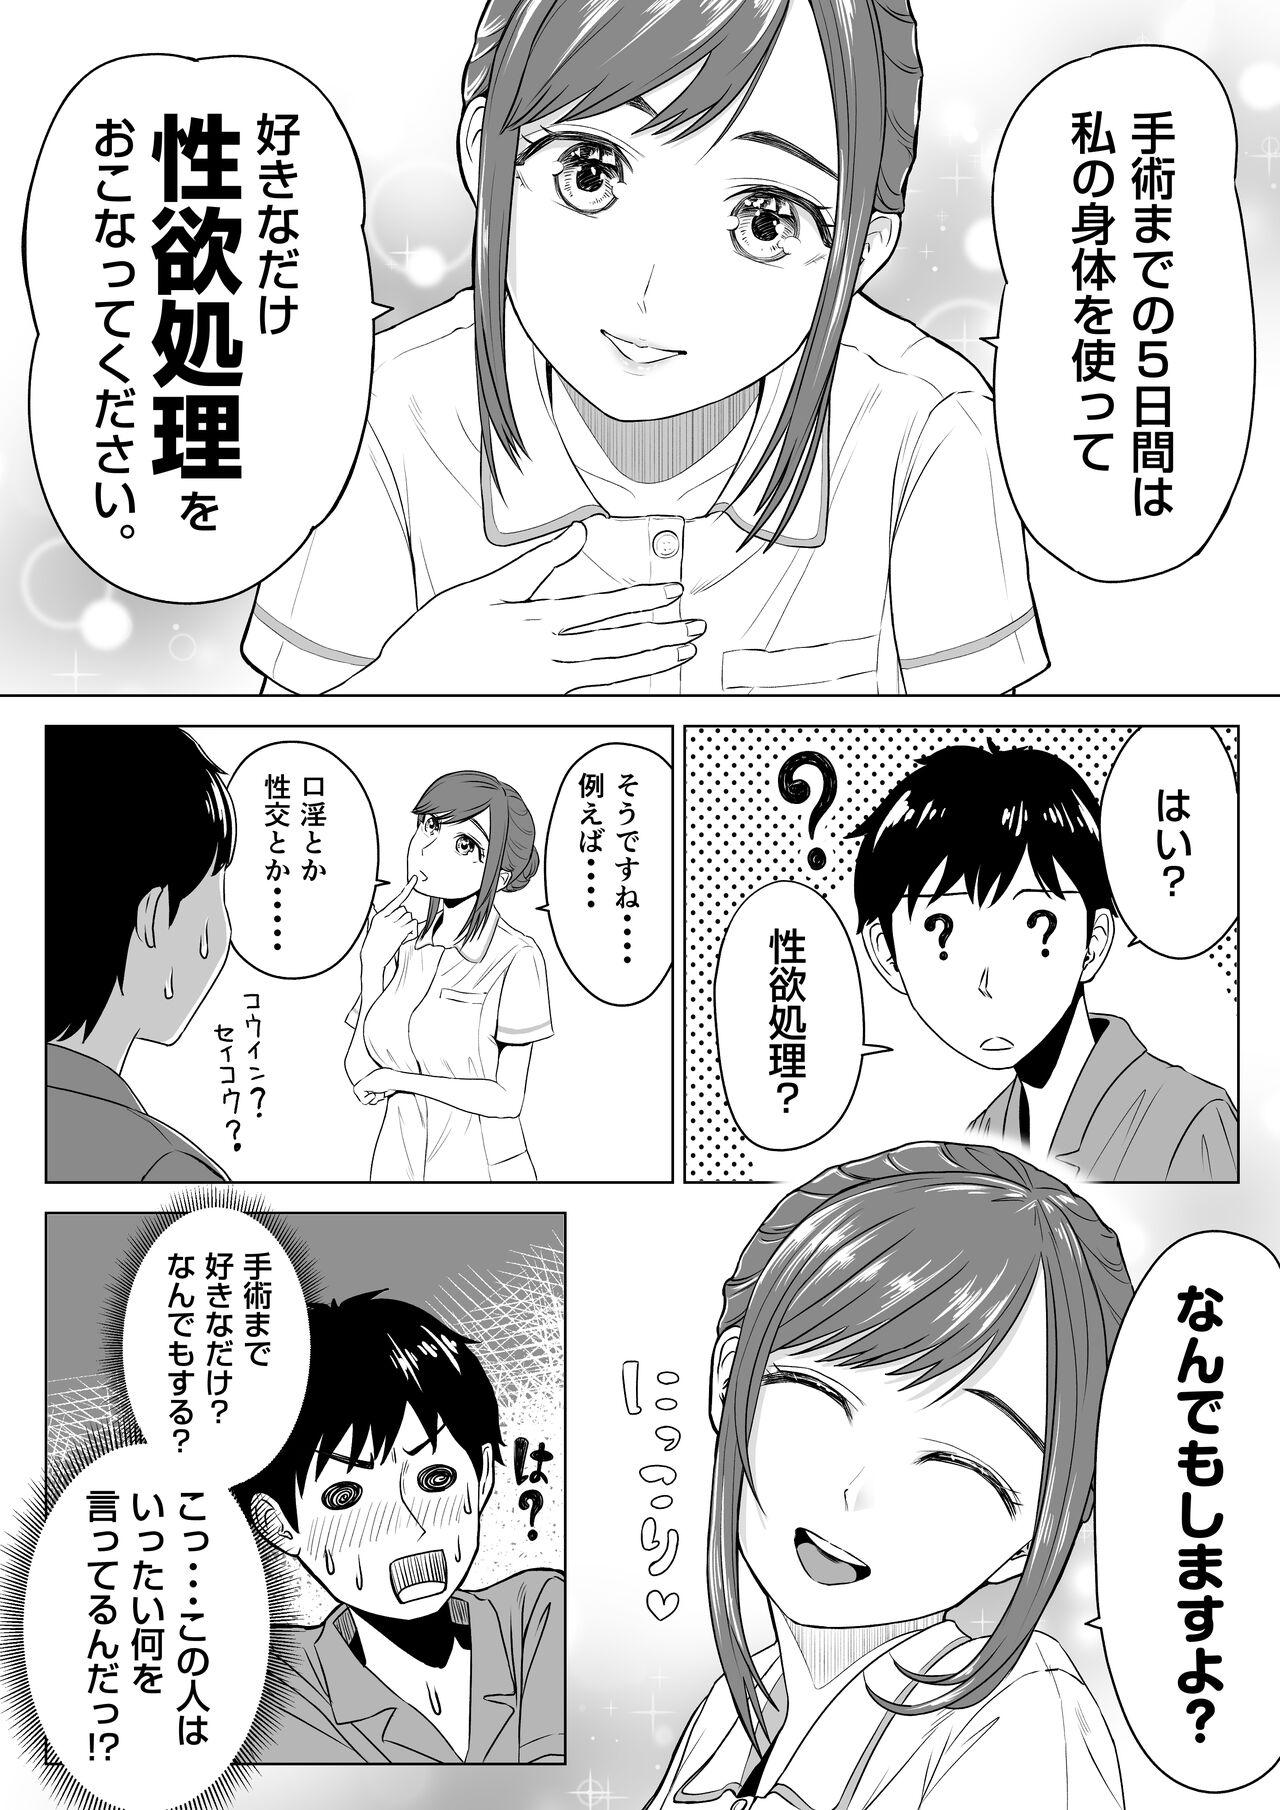 Sucking Cocks 高橋あゆみさんは医療従順者 - Original Point Of View - Page 6